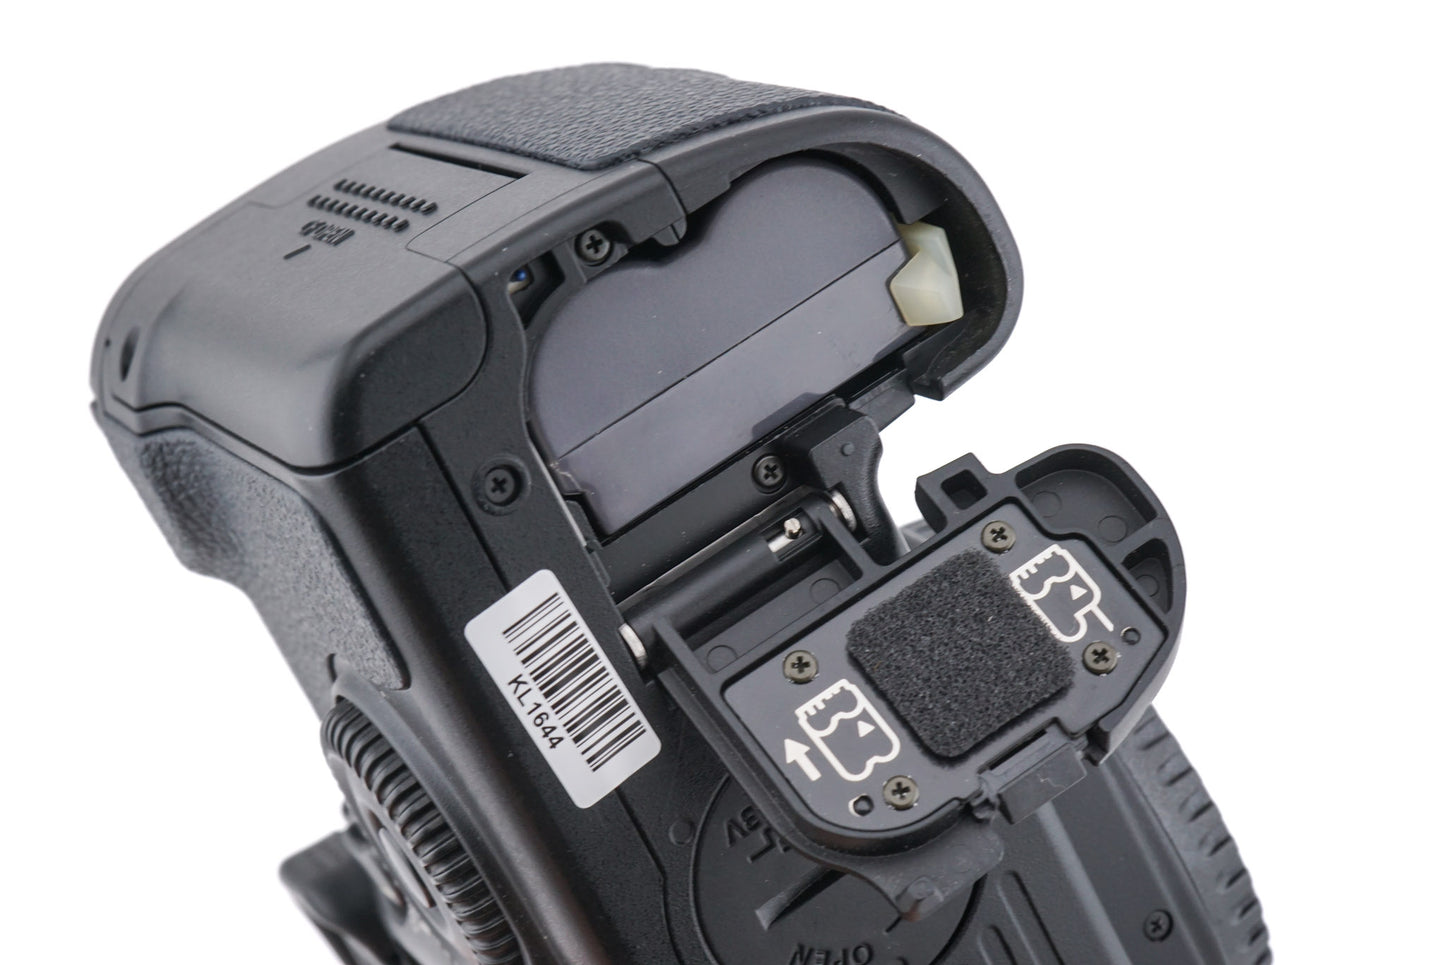 Canon EOS D60 + Compact Power Adapter CA-PS400